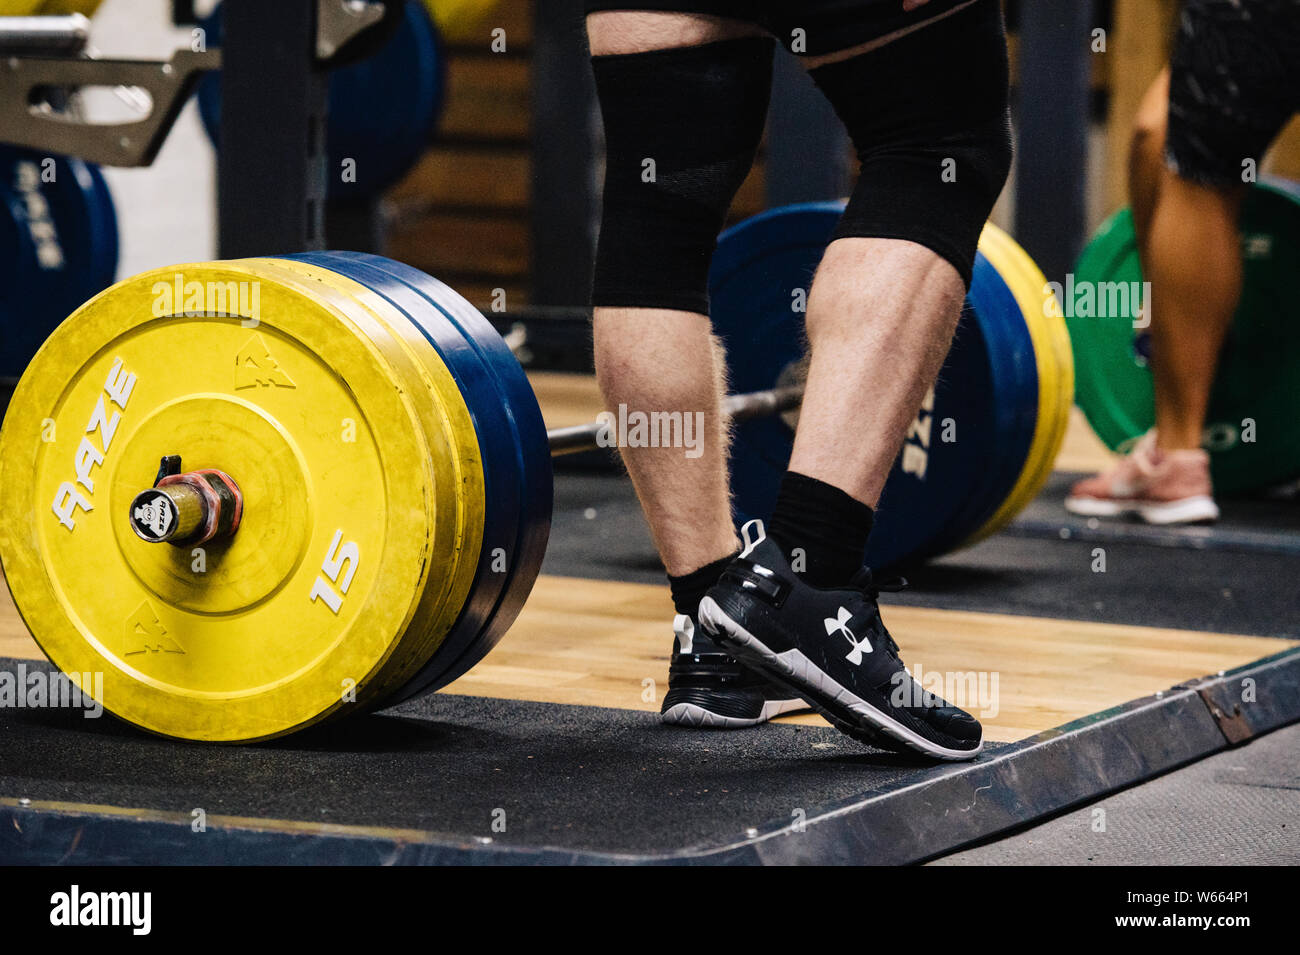 Male Competitor at the University of Leeds Powerlifting meet up at Implexus Gym. Stock Photo